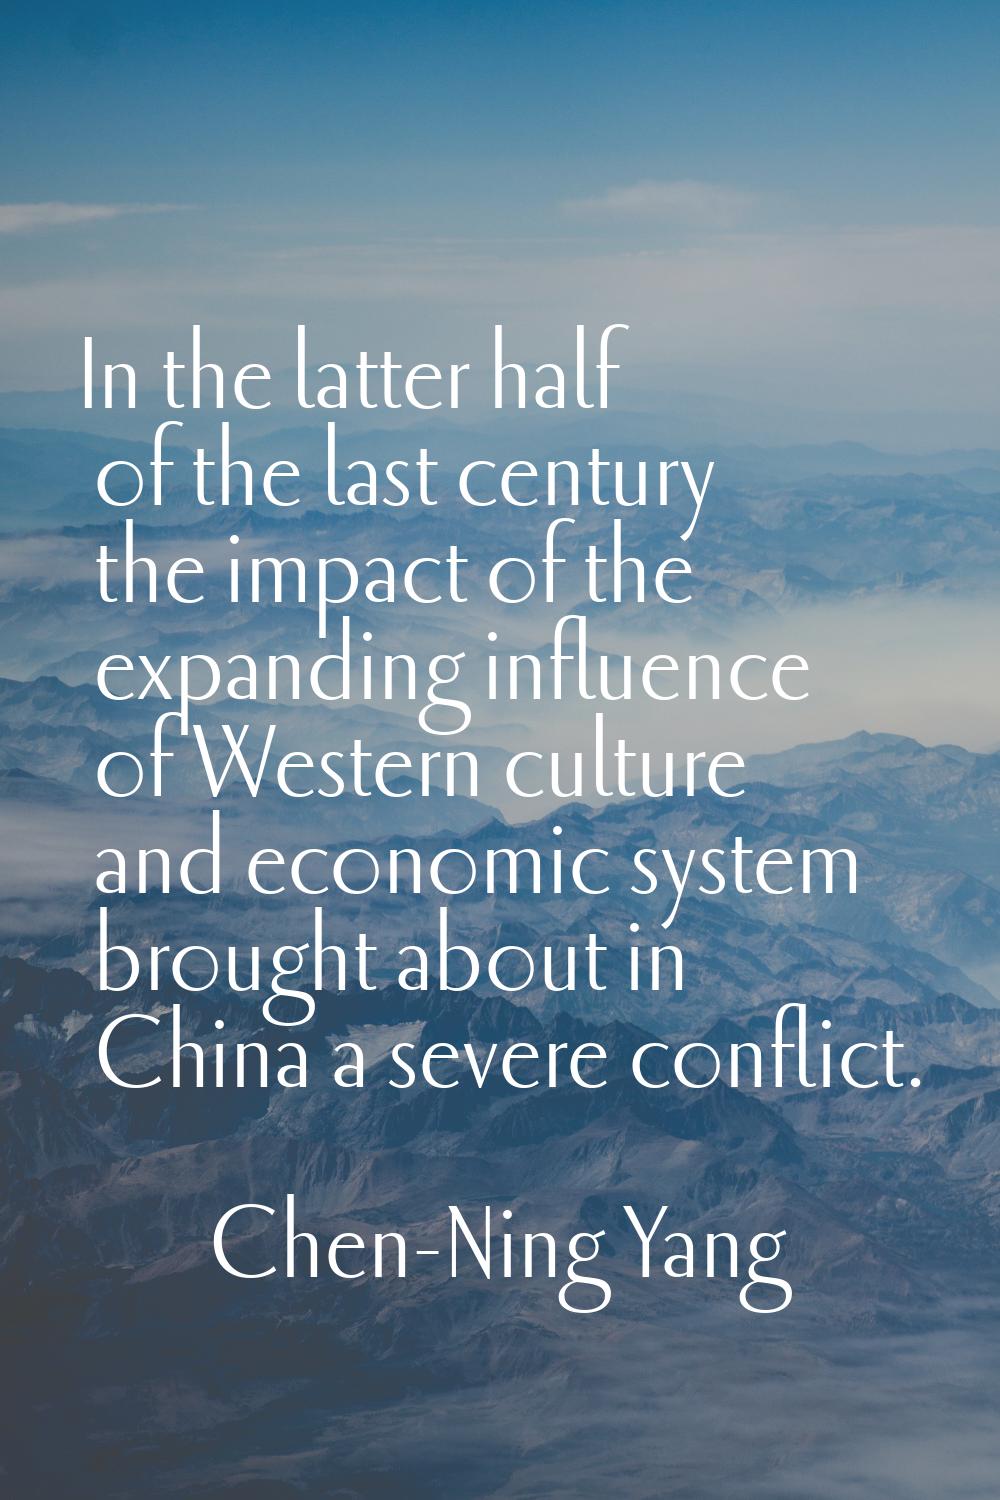 In the latter half of the last century the impact of the expanding influence of Western culture and